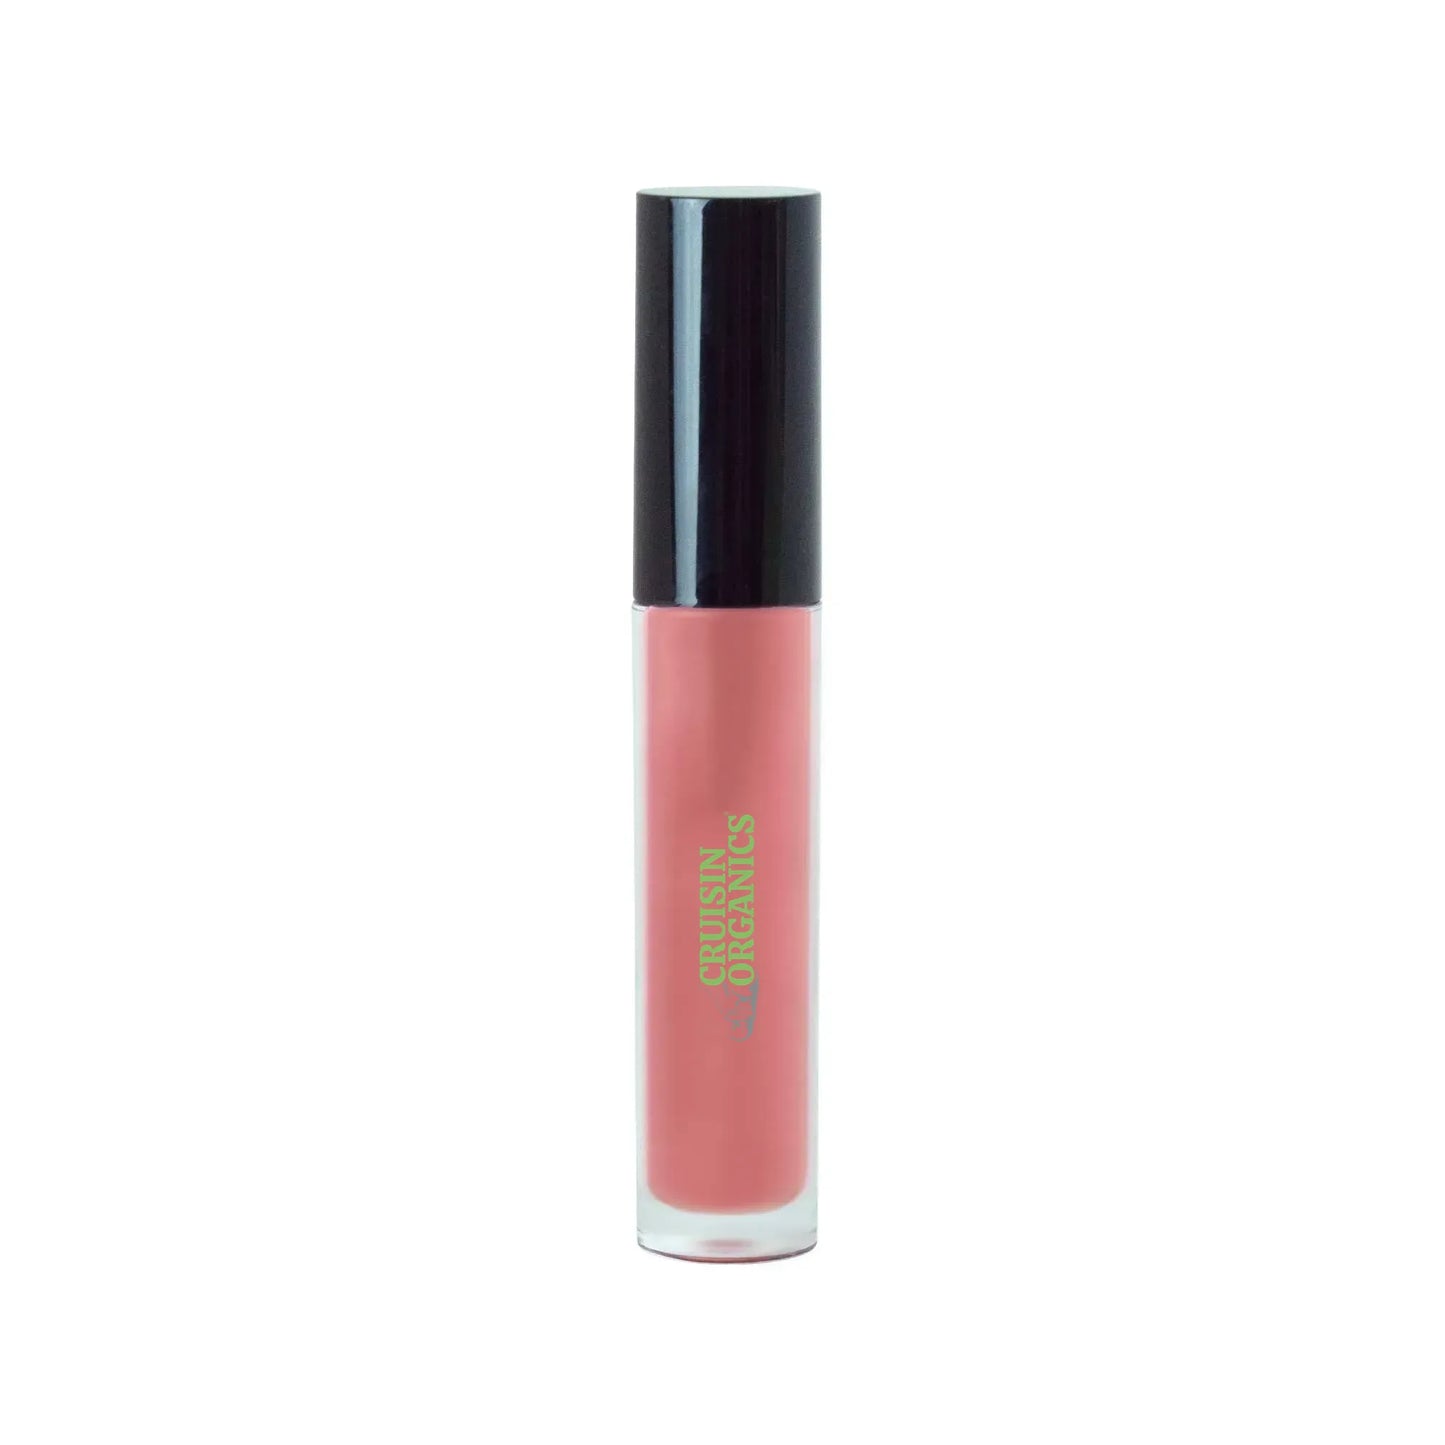 Take your gloss and brilliance to the next level with our Cruisin Organics Shine liquid lip gloss. One swipe and your lips will look fuller with an illuminating shine. Our high impact, liquid lip gloss is formulated so you can have that effortless, brilliant gloss throughout the day or night. Add the shine and pigments you want with both shimmer and natural finish options. With a sheer tint, this liquid lip gloss’ shimmer will surely have you use it over and over again